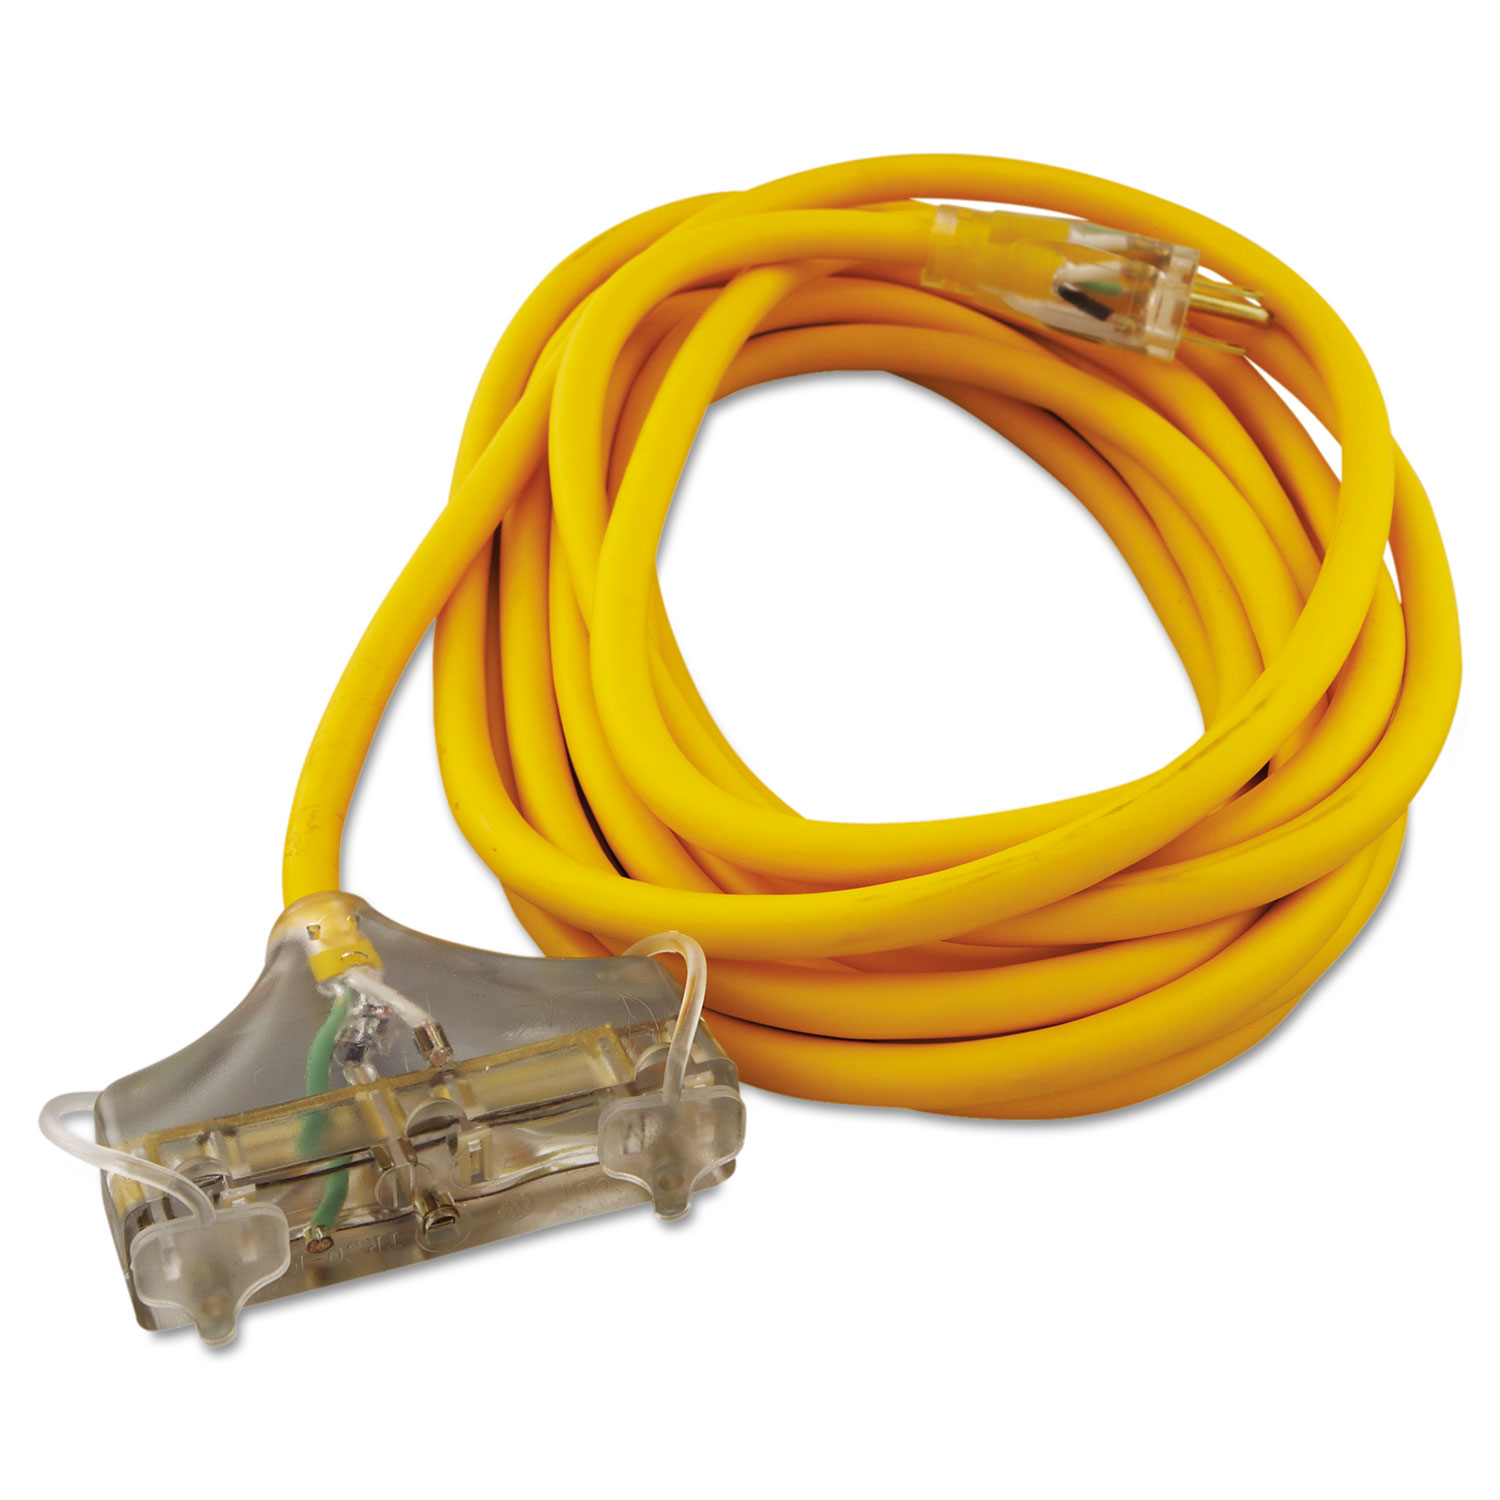  CCI 034870002 Polar/Solar Outdoor Extension Cord, 25ft, Three-Outlets, Yellow (COC03487) 